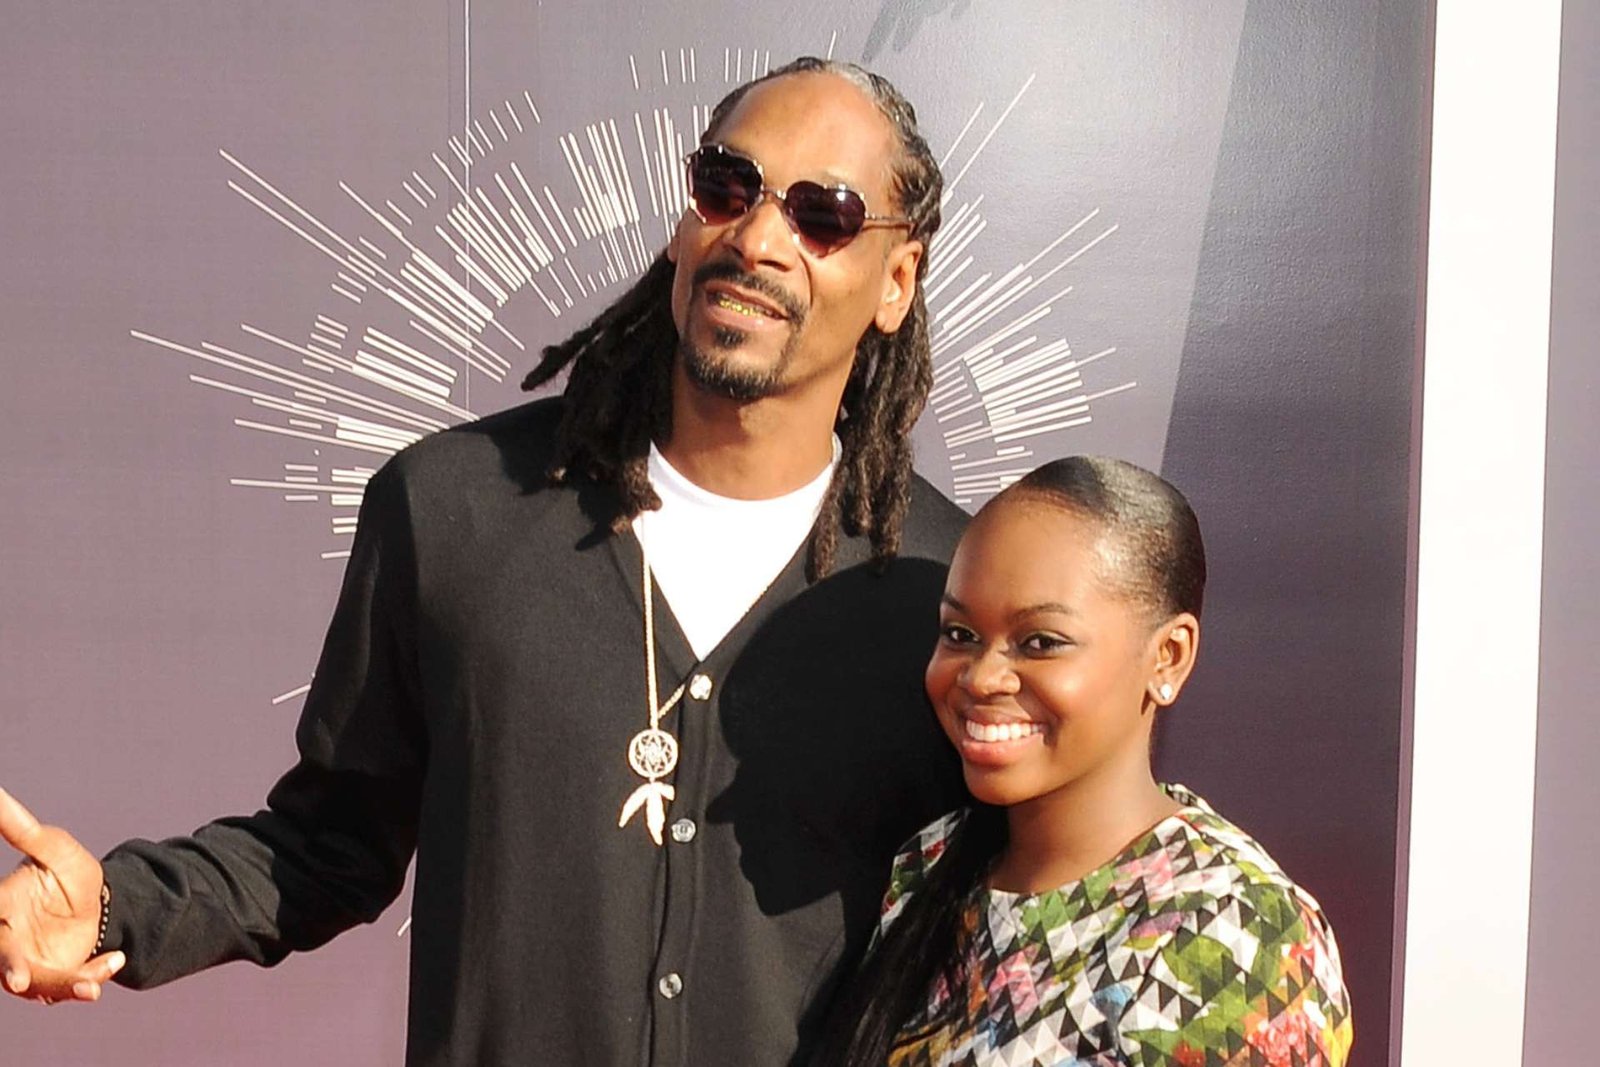 Snoop Dogg Updates Fans on Daughter Cori Broadus's Health Following Severe Stroke and Lupus Battle